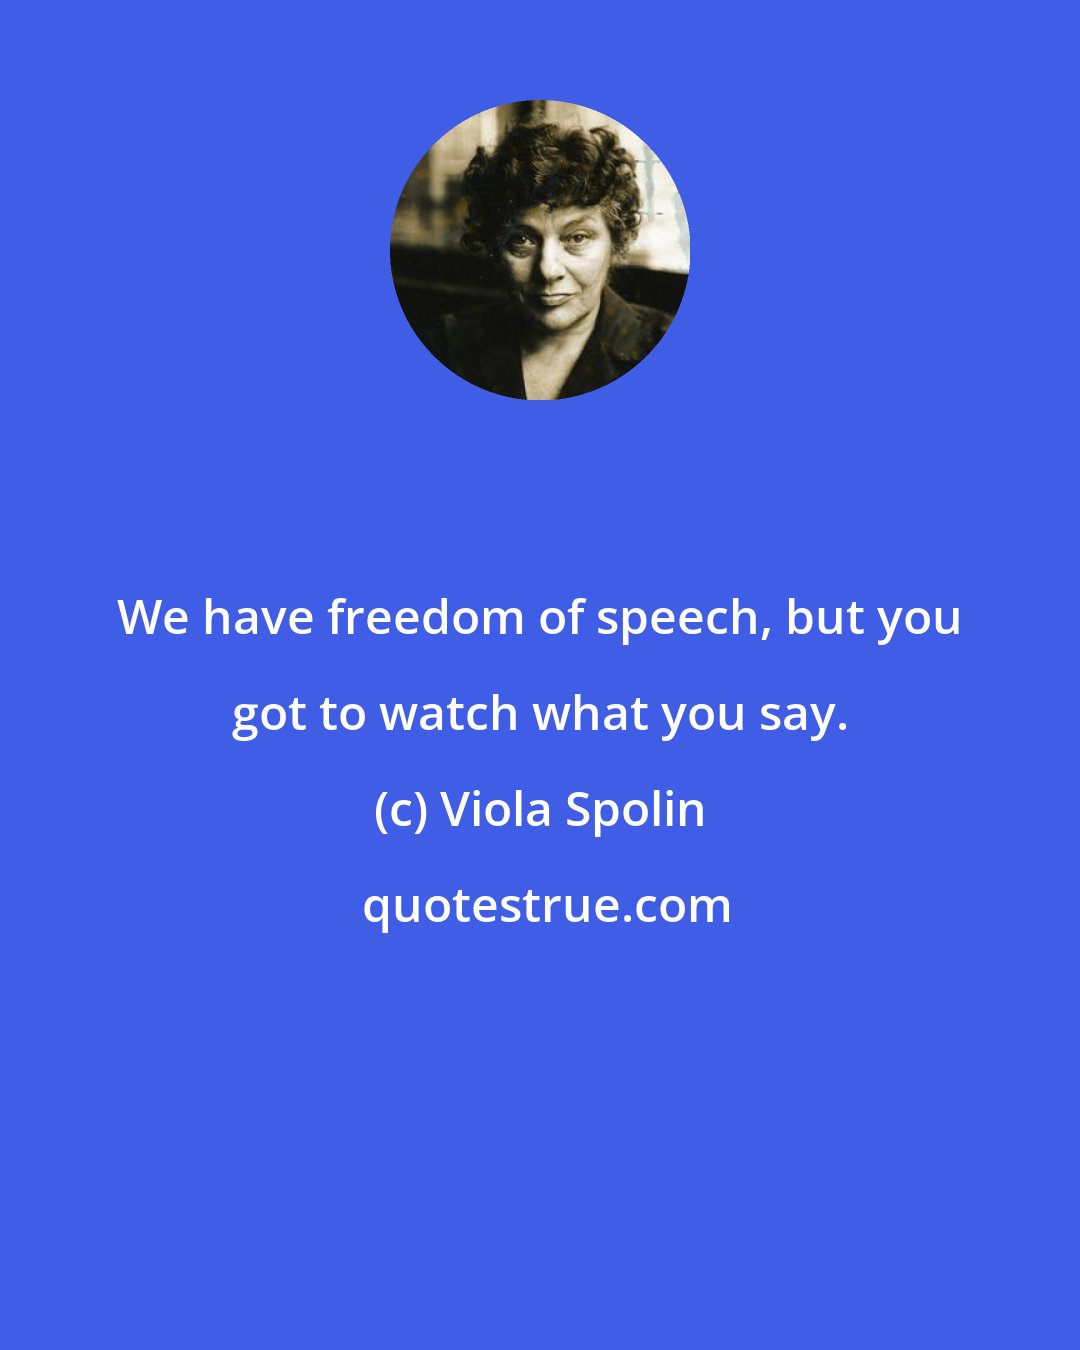 Viola Spolin: We have freedom of speech, but you got to watch what you say.